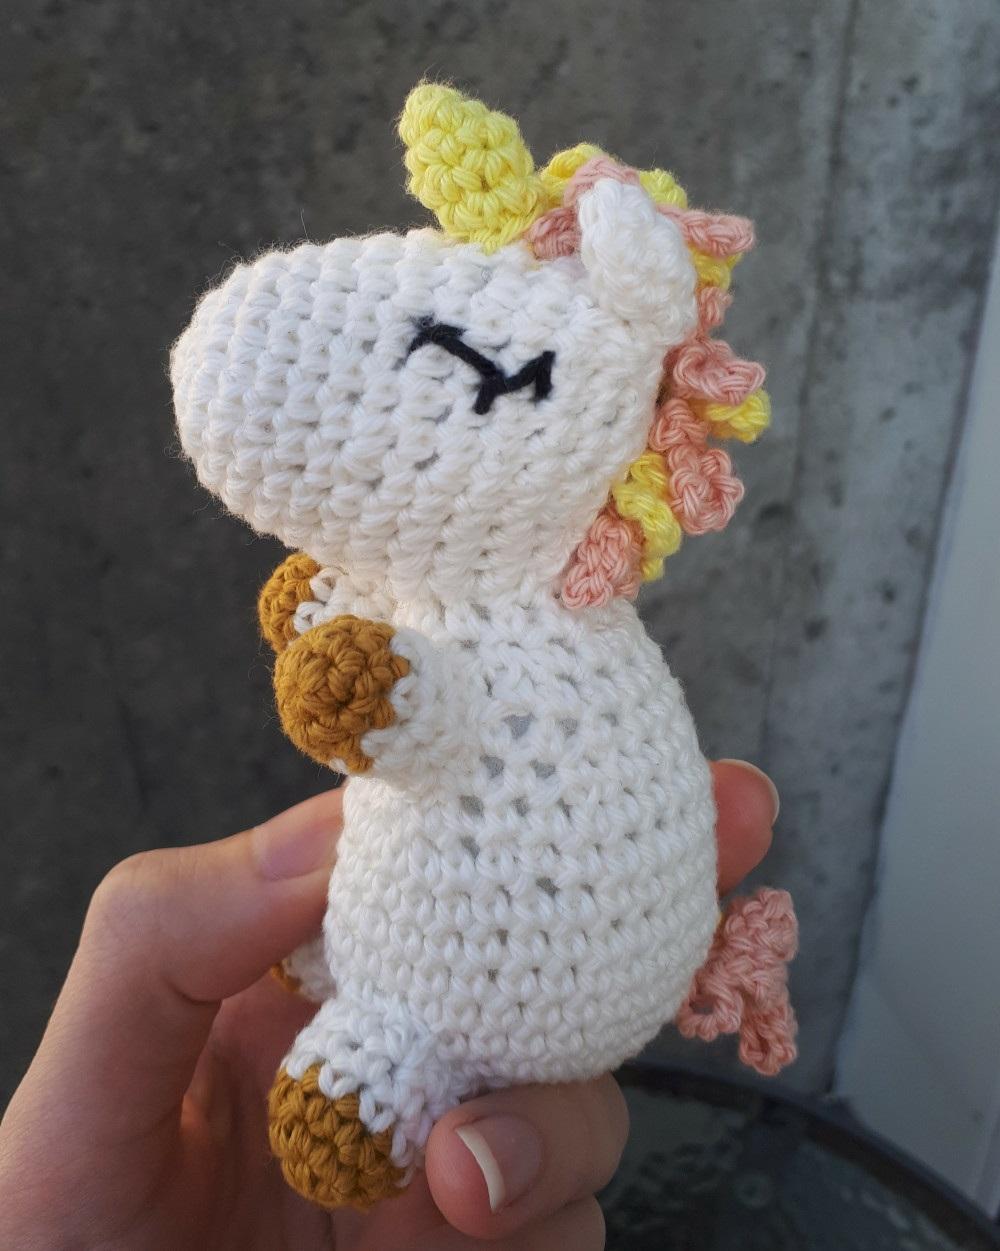 Finish off and save a long tail to sew it on with. Stuff a little. Sew it on to the forehead of the horse, and voila, you got yourself a unicorn!